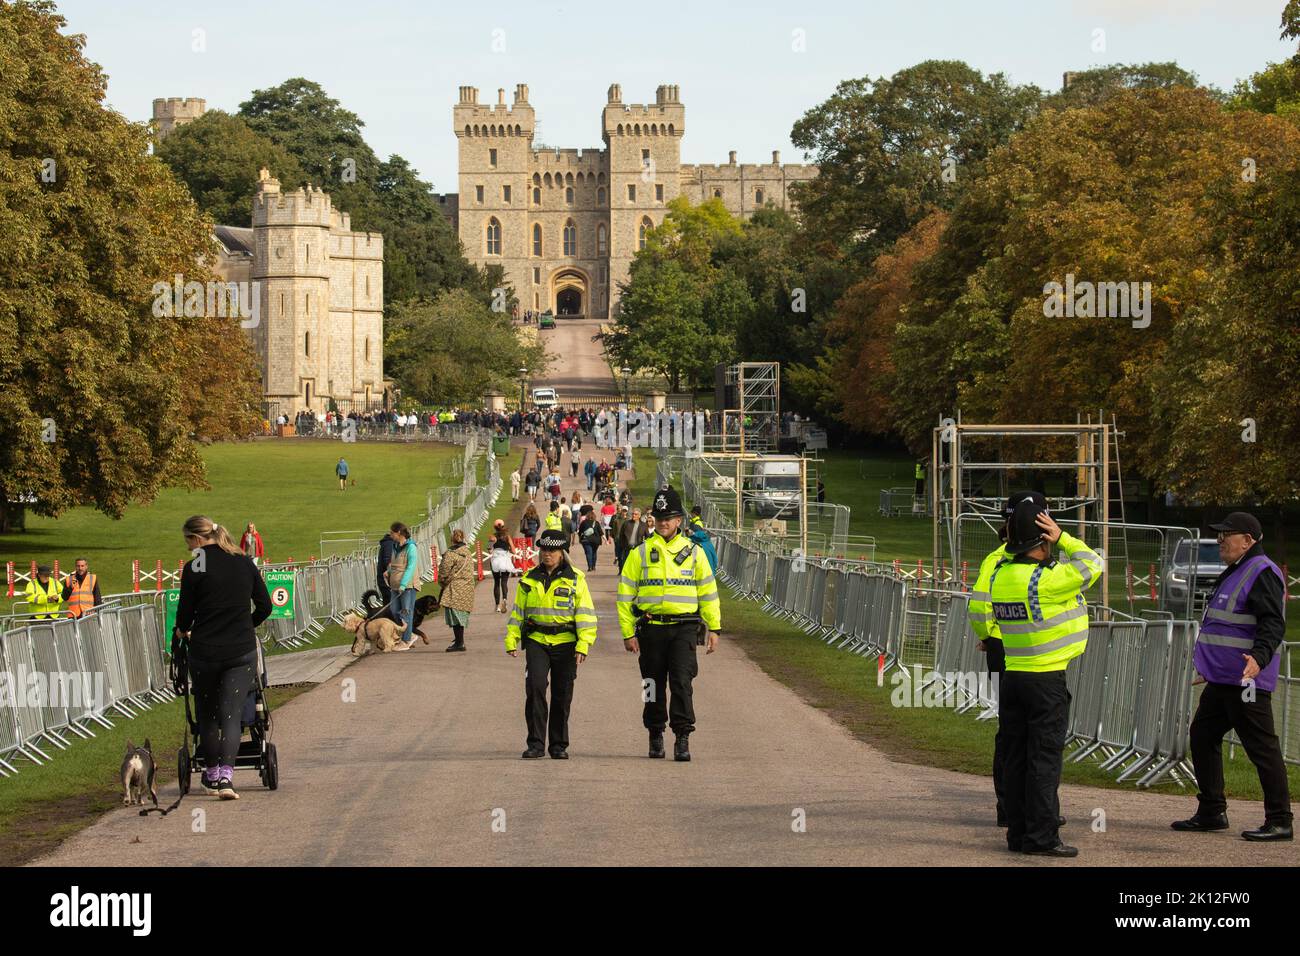 Windsor, UK. 14th September, 2022. Thames Valley Police officers patrol on the Long Walk in Windsor Great Park amid preparations for the funeral and committal of Queen Elizabeth II. Queen Elizabeth II, the UK's longest-serving monarch, died at Balmoral aged 96 on 8th September after a reign lasting 70 years and will be buried in the King George VI memorial chapel in Windsor following a state funeral in Westminster Abbey on 19th September. Credit: Mark Kerrison/Alamy Live News Stock Photo